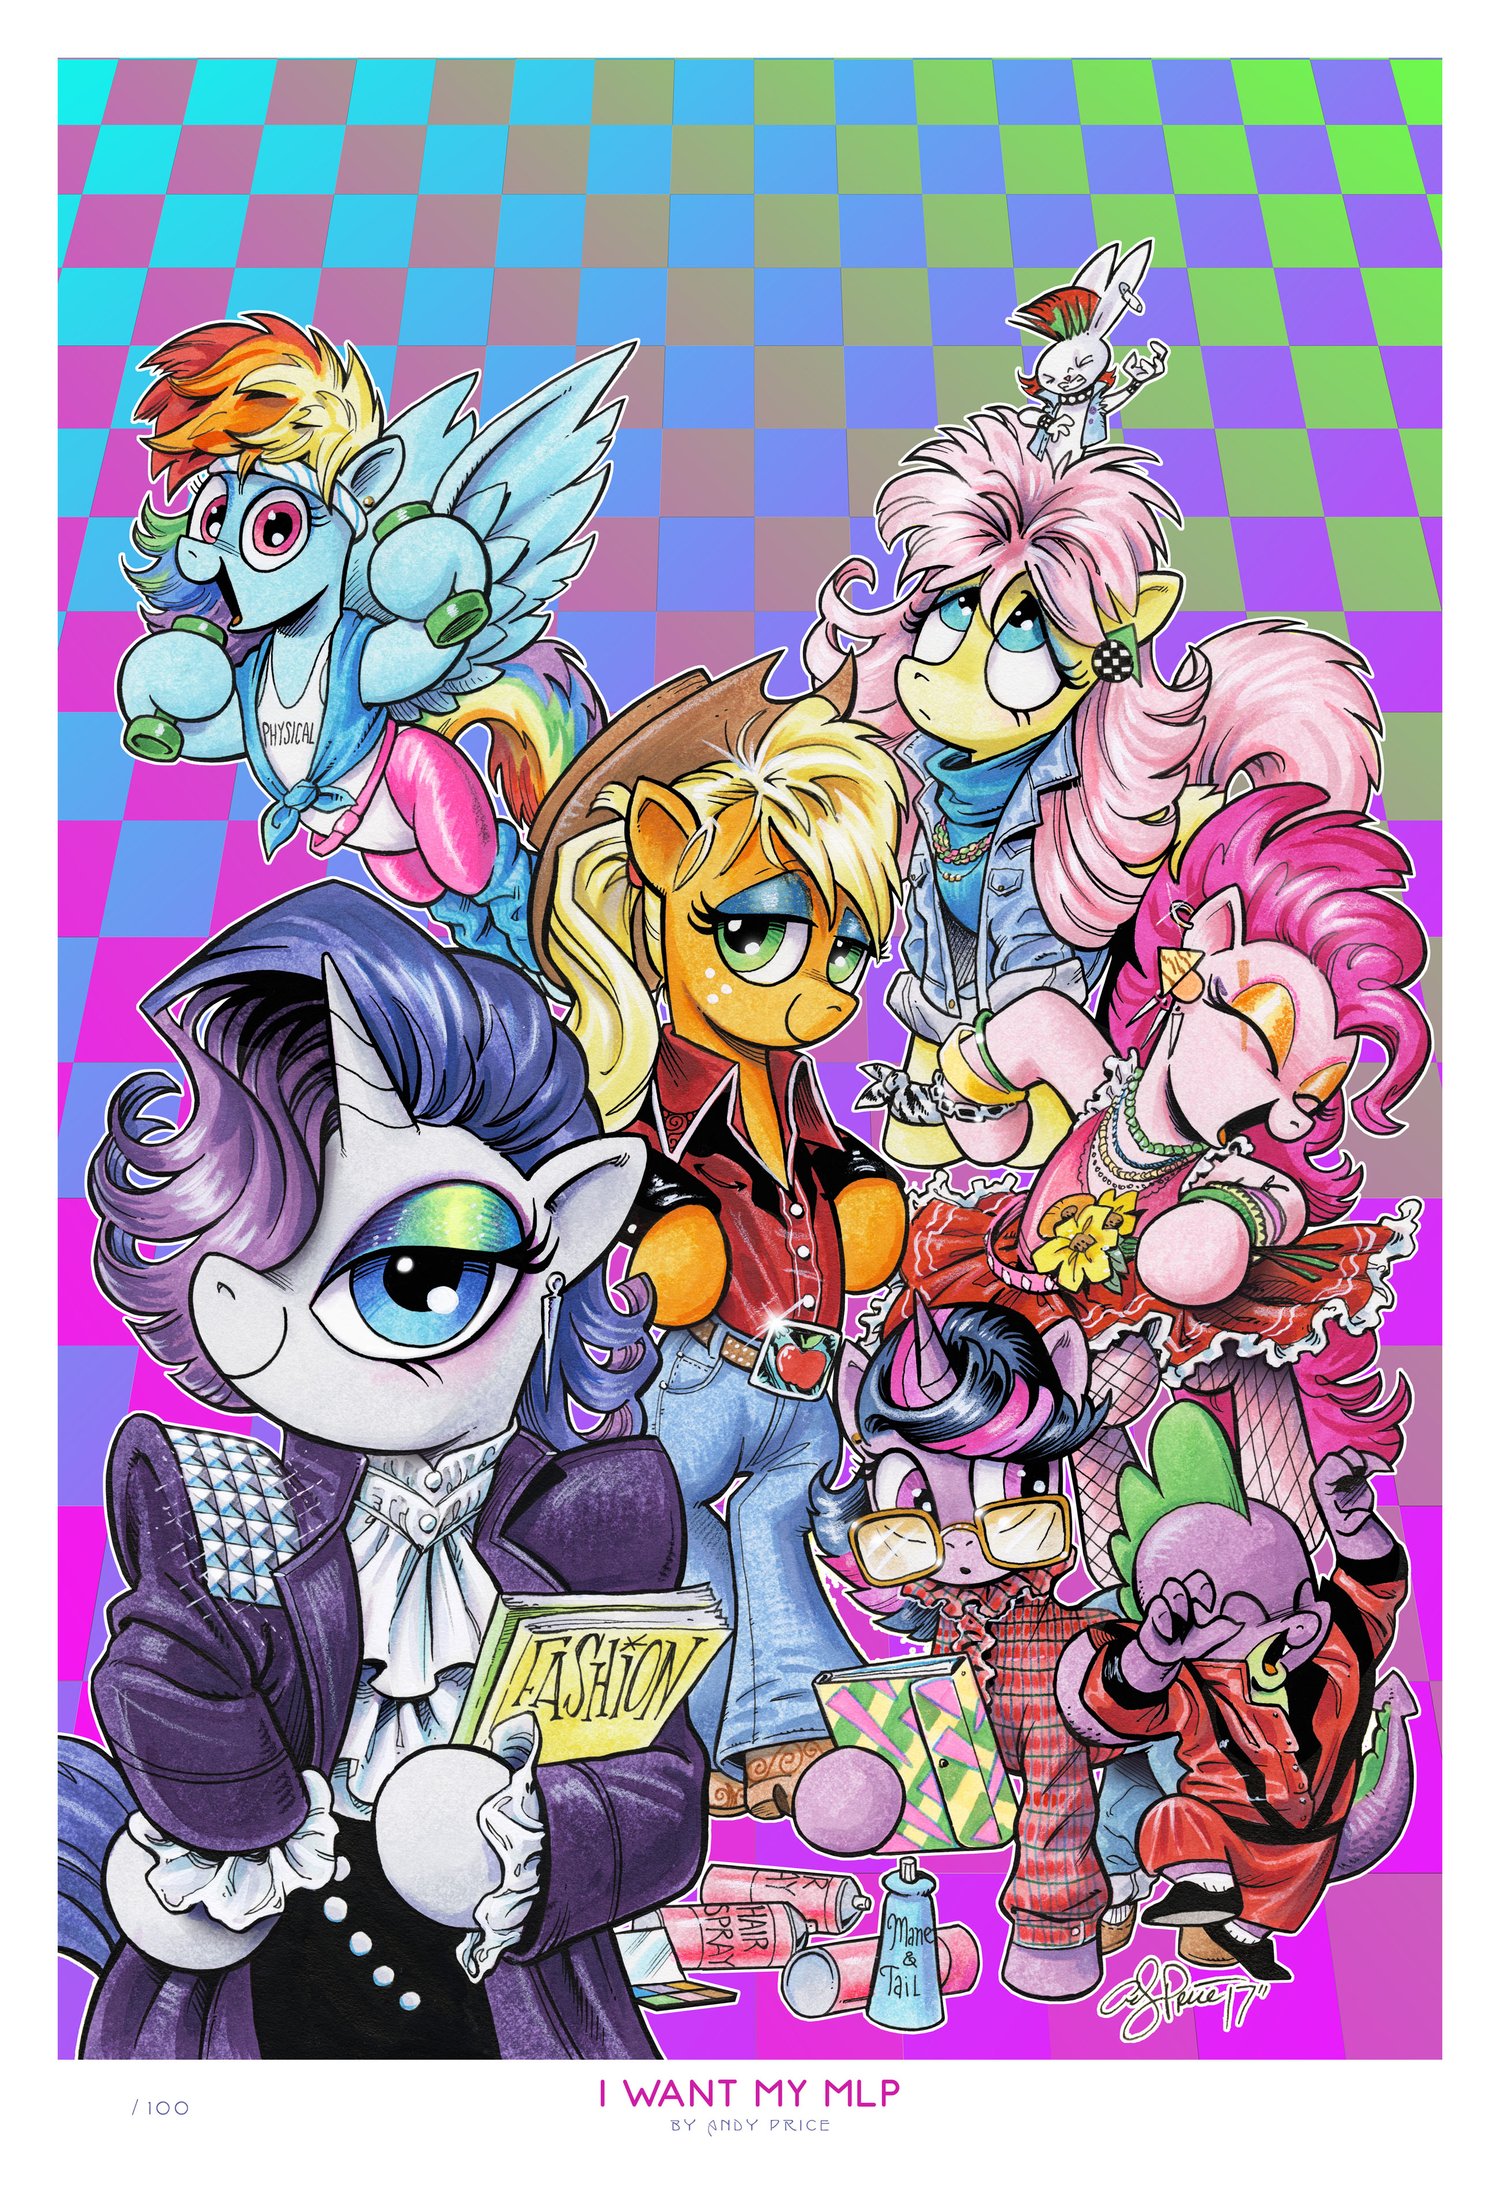 I Want My MLP - Limited Edition Print